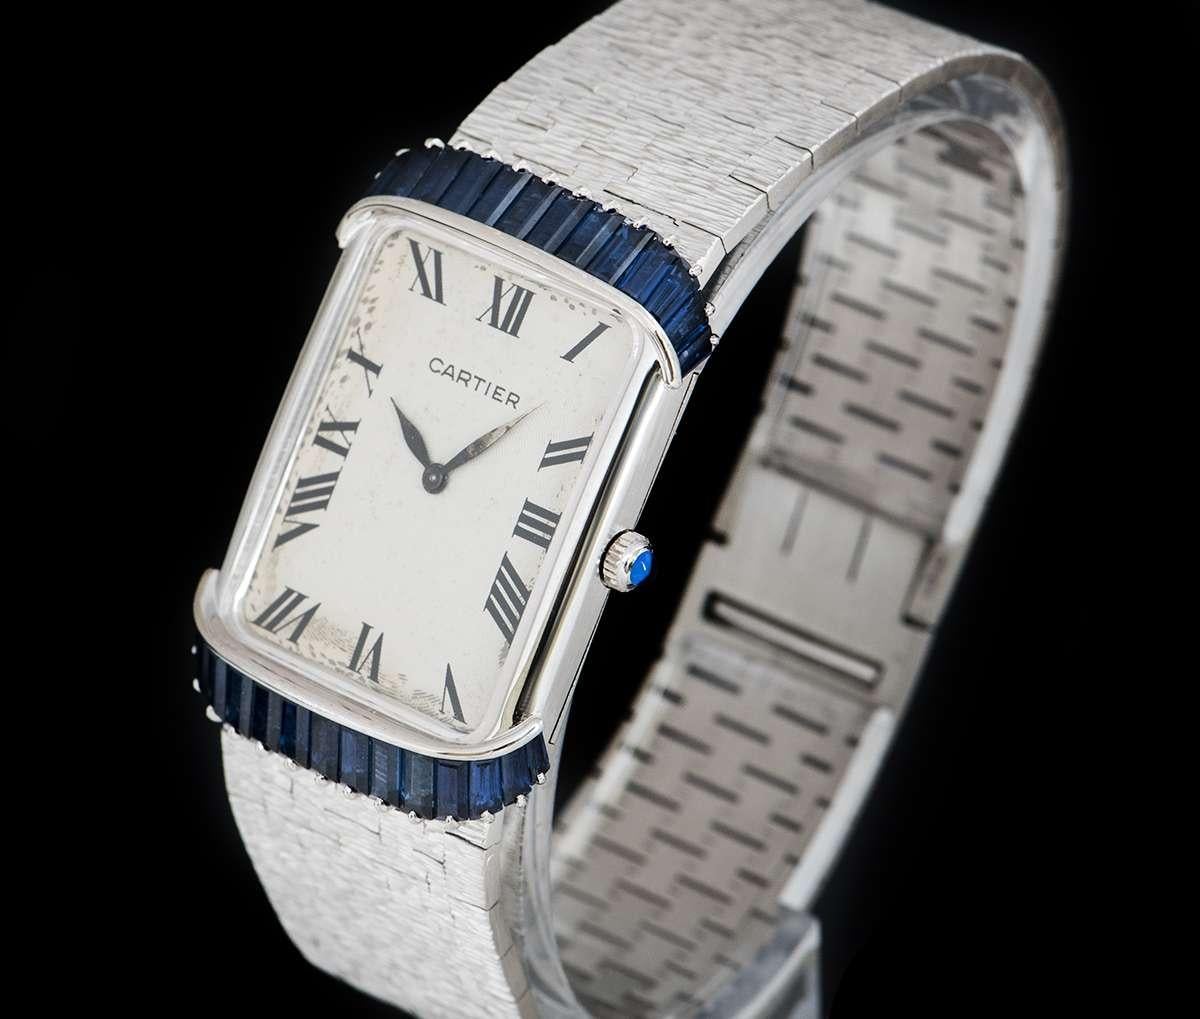 A 23 mm 18k White Gold Retailed by Cartier Vintage Ladies Wristwatch, silver guilloche dial with roman numerals signed by Cartier, a fixed 18k white gold bezel, an 18k white gold case set with approximately 15 sapphires on each side (total of